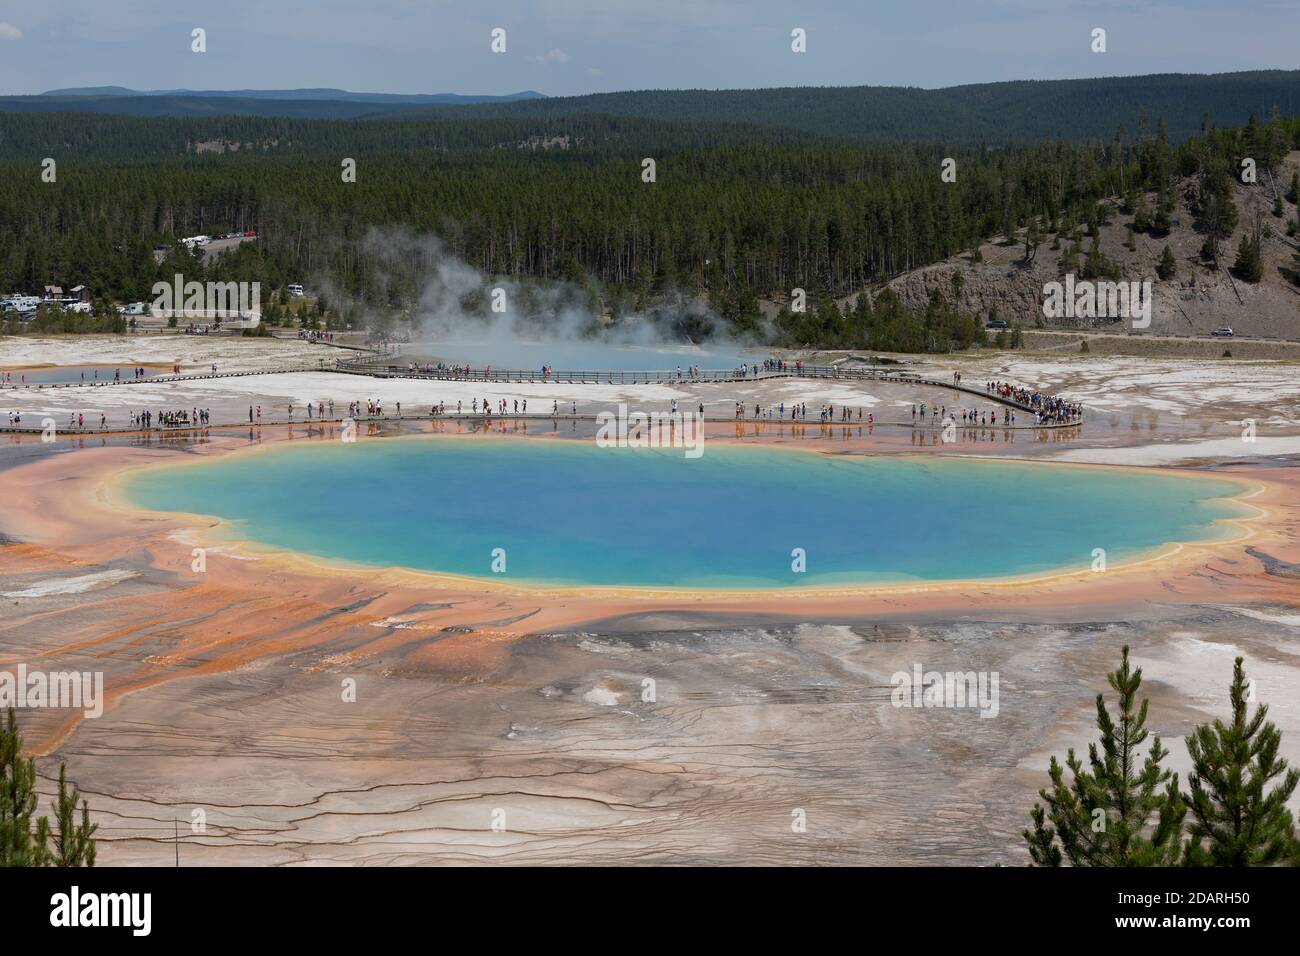 Visitors cue up along the boardwalk at Grand Prismatic Spring in Yellowstone National Park, Wyoming on Monday, August 3, 2020. Many of the parks board Stock Photo